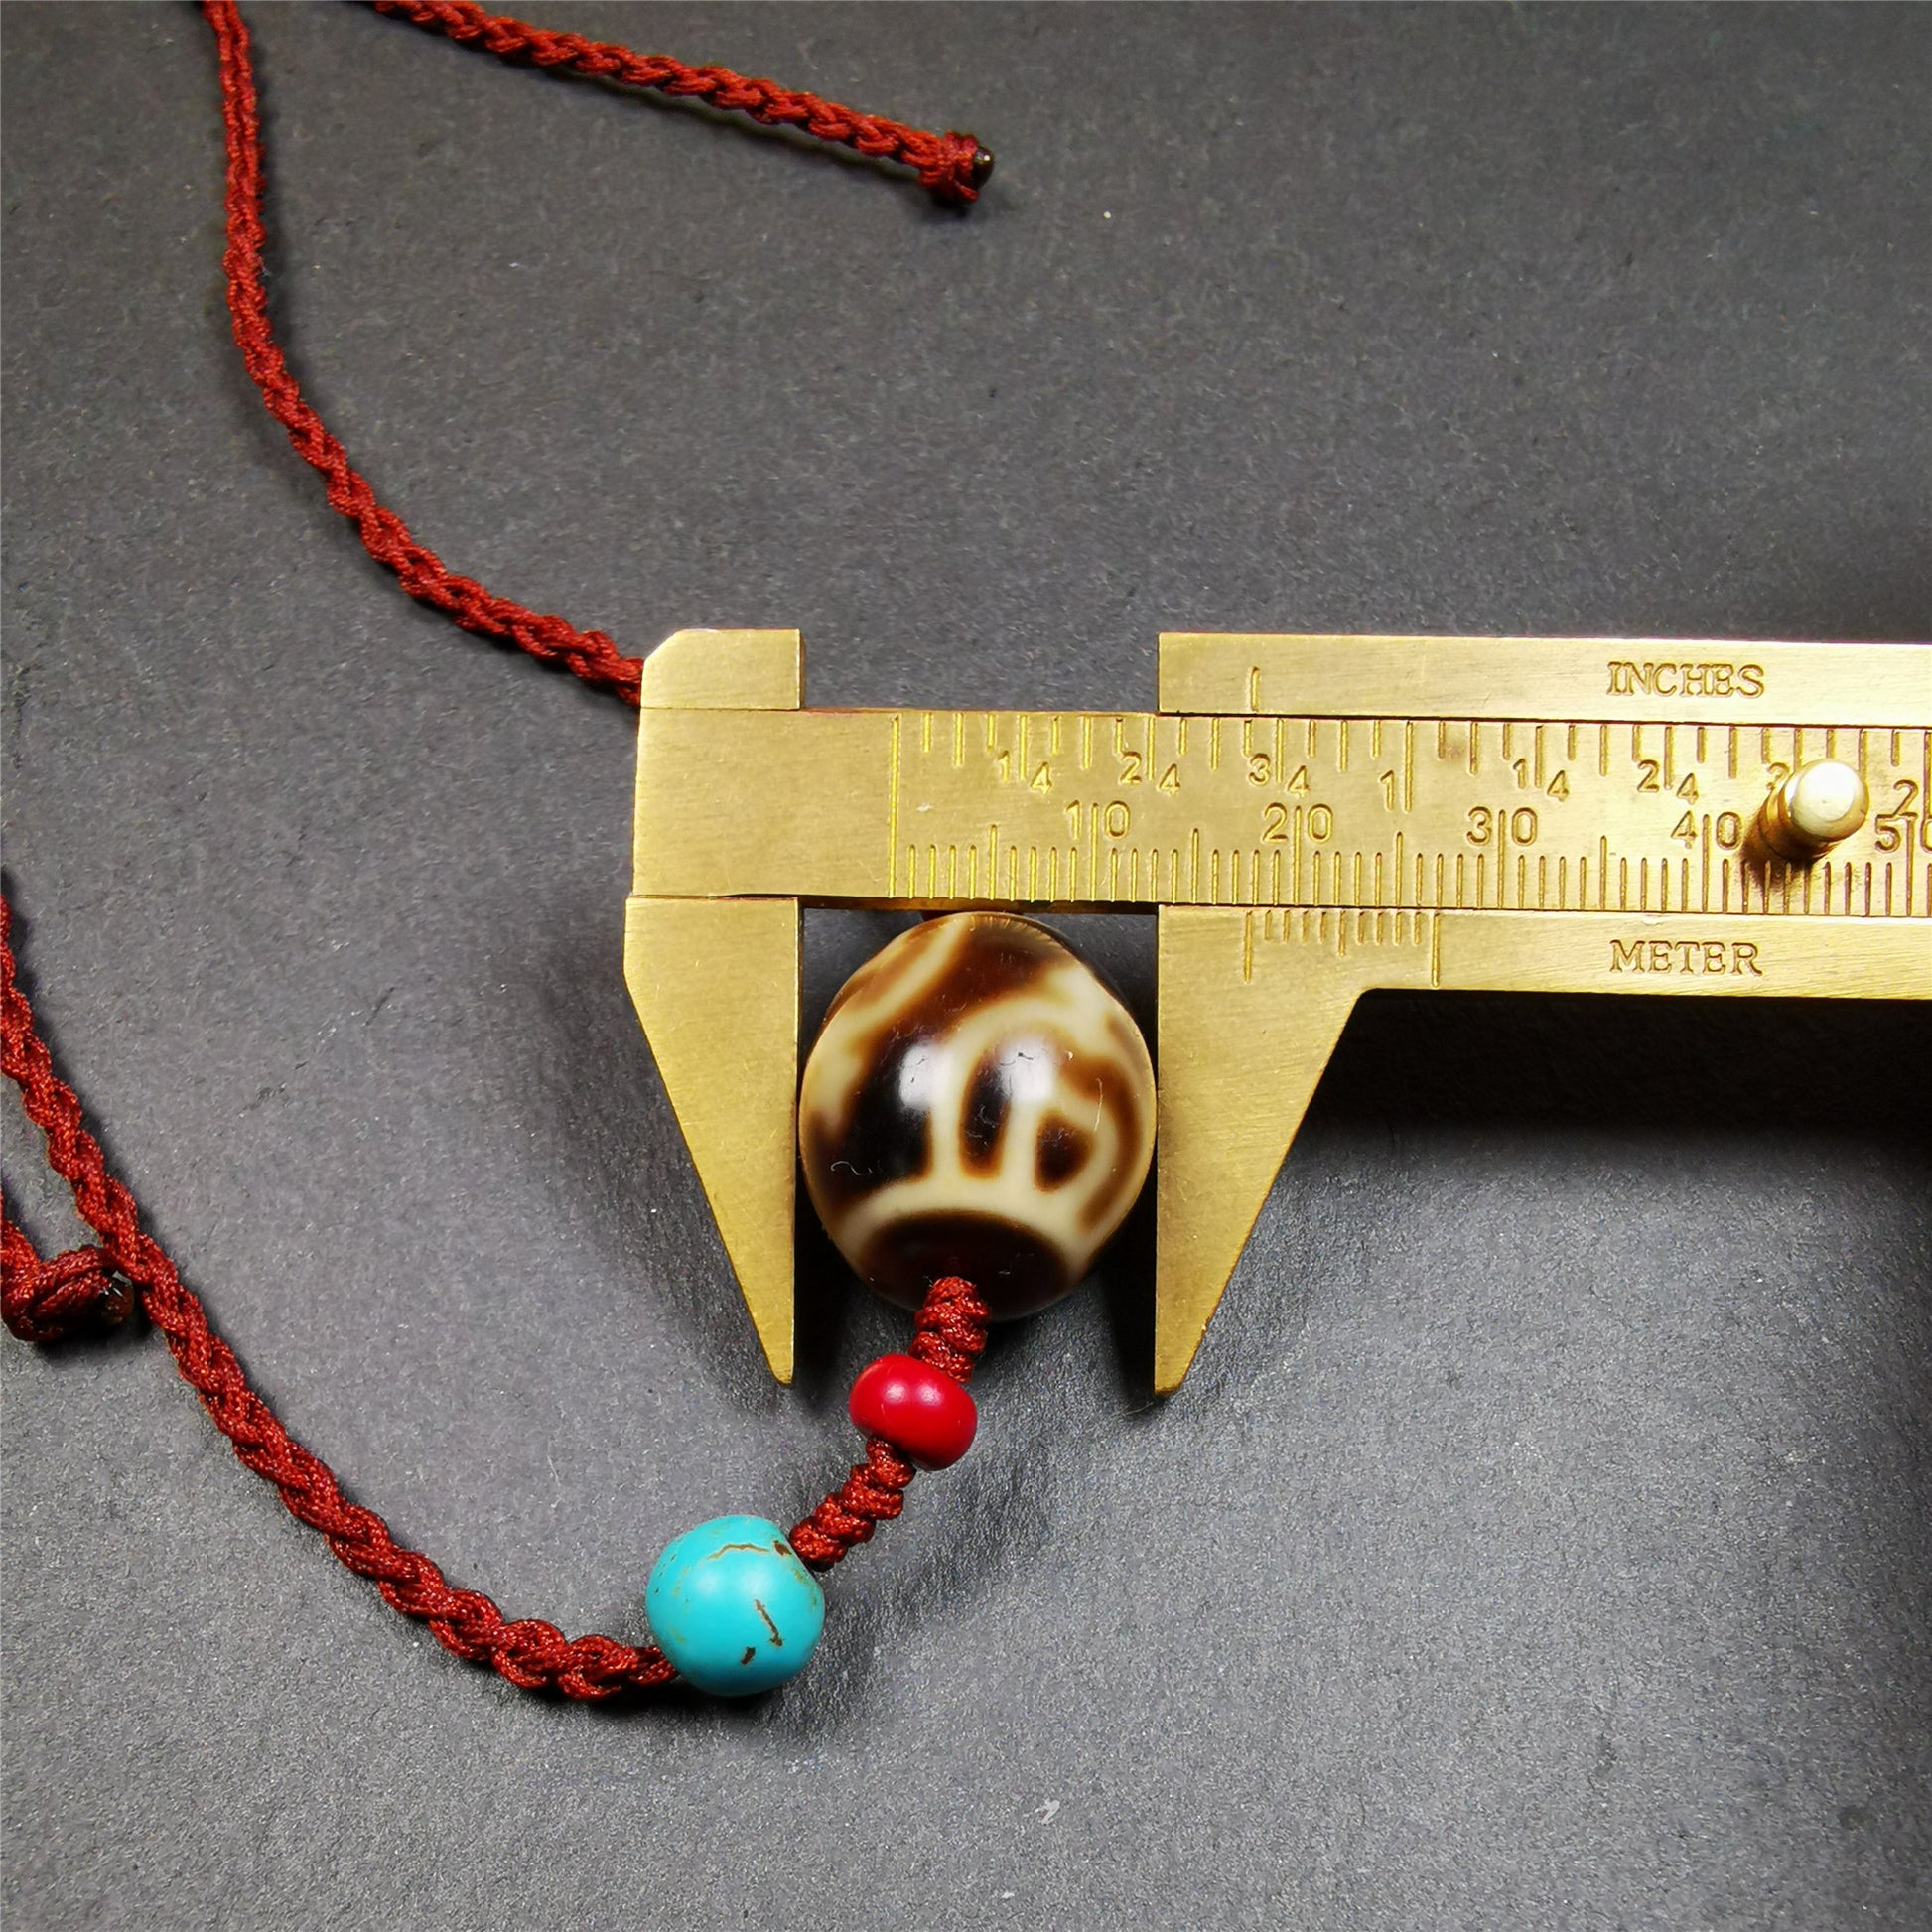 This necklace was hand-woven by Tibetans from Baiyu County, the main bead is a treasure vase dalo dzi, paired with 2 turquoise and 2 sharpa beads,about 30 years old. It can be worn as a fashionable accessory,holds cultural and religious significance.